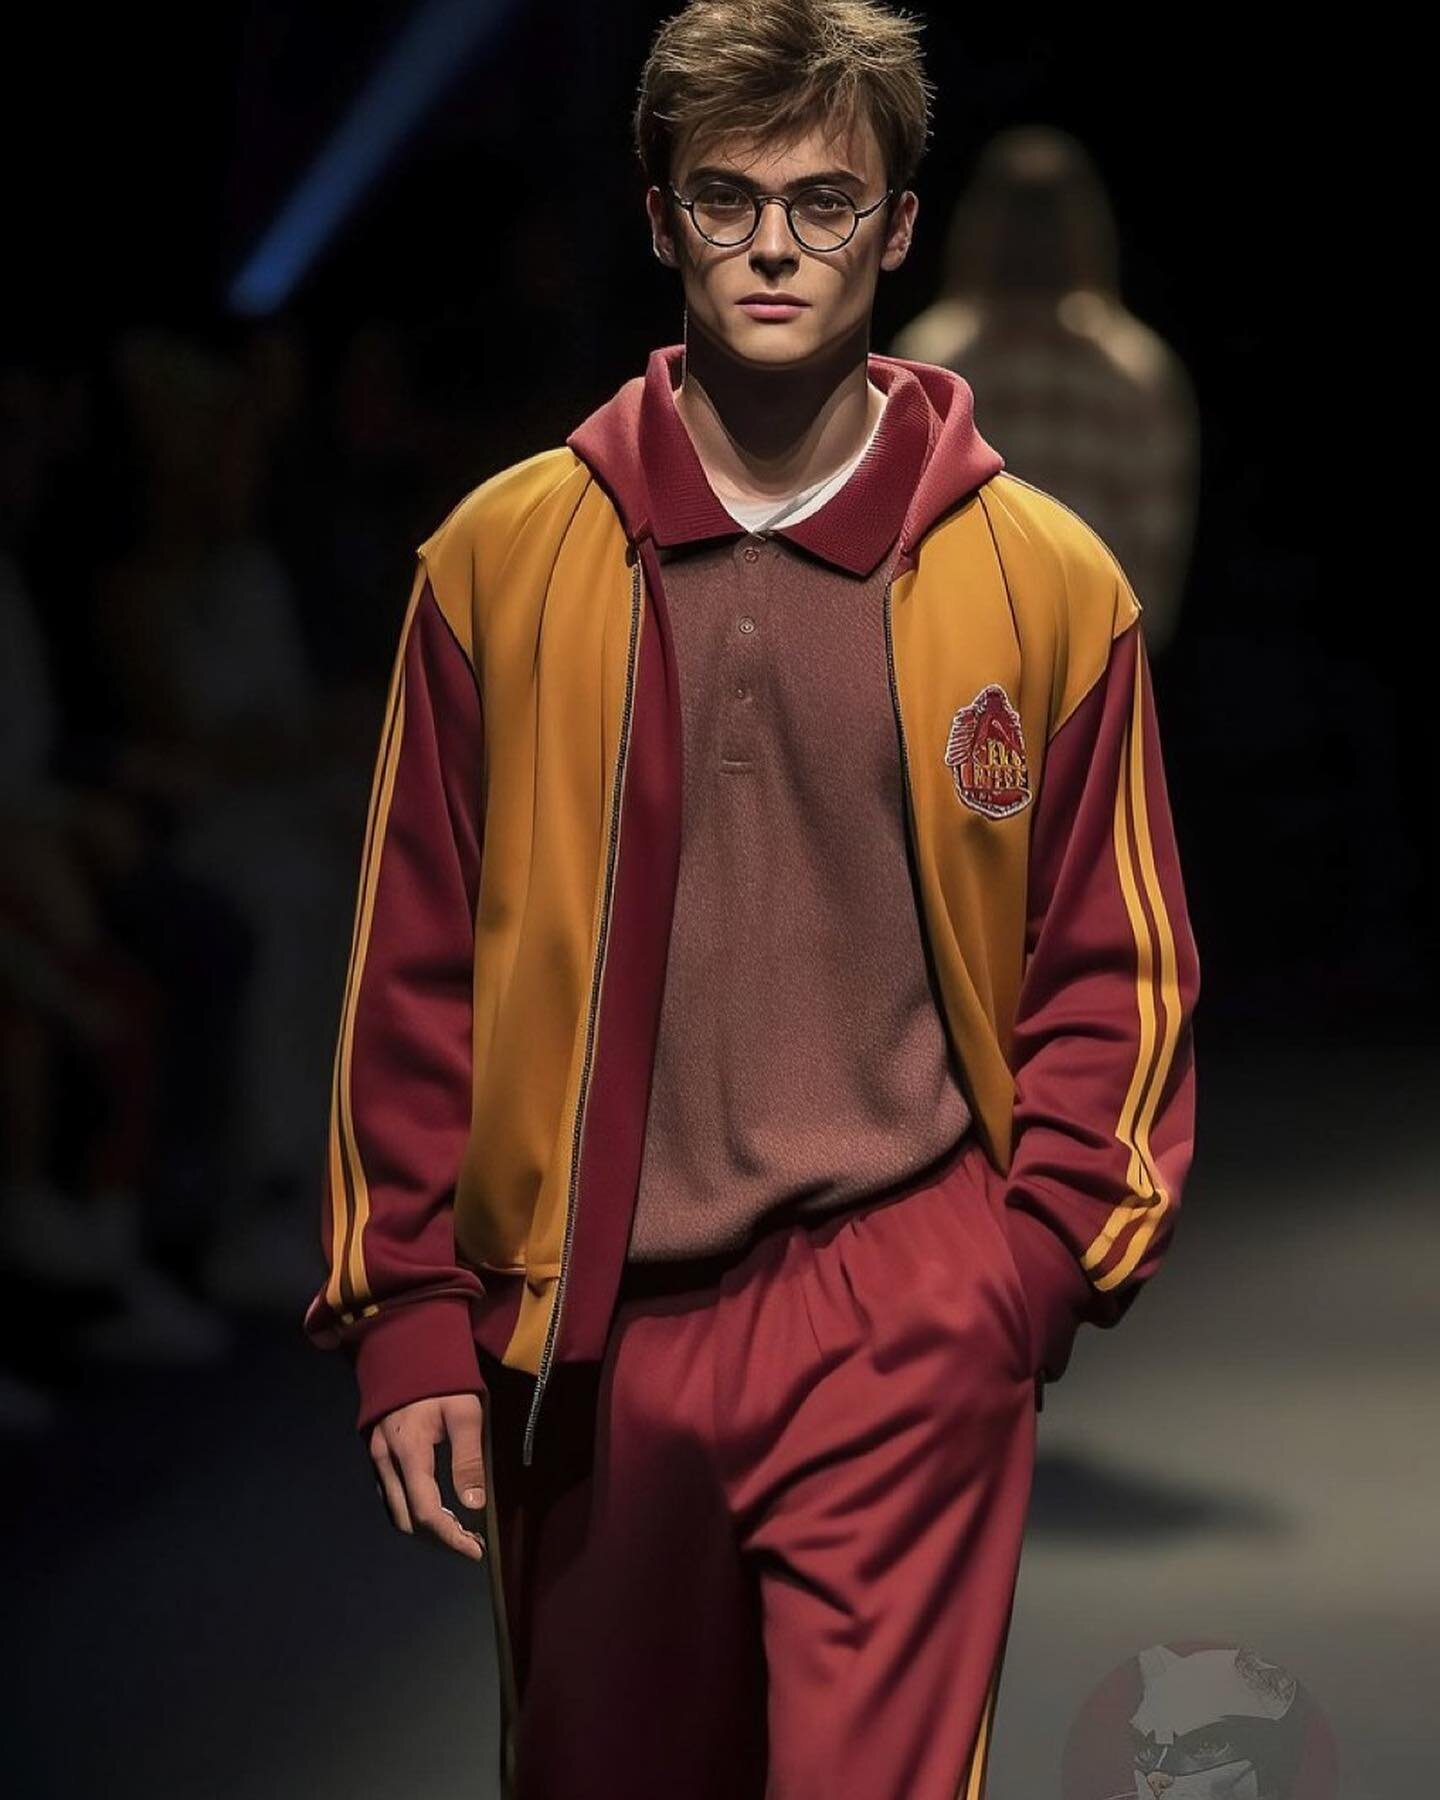 Harry Potter x Adidas just dropped! Check out the runway looks here!!!✨

Except this isn&rsquo;t real at all, this is 100% AI.

This Ai generated collection was created on Midjourney! It&rsquo;s mind boggling how realistic these images are becoming.
